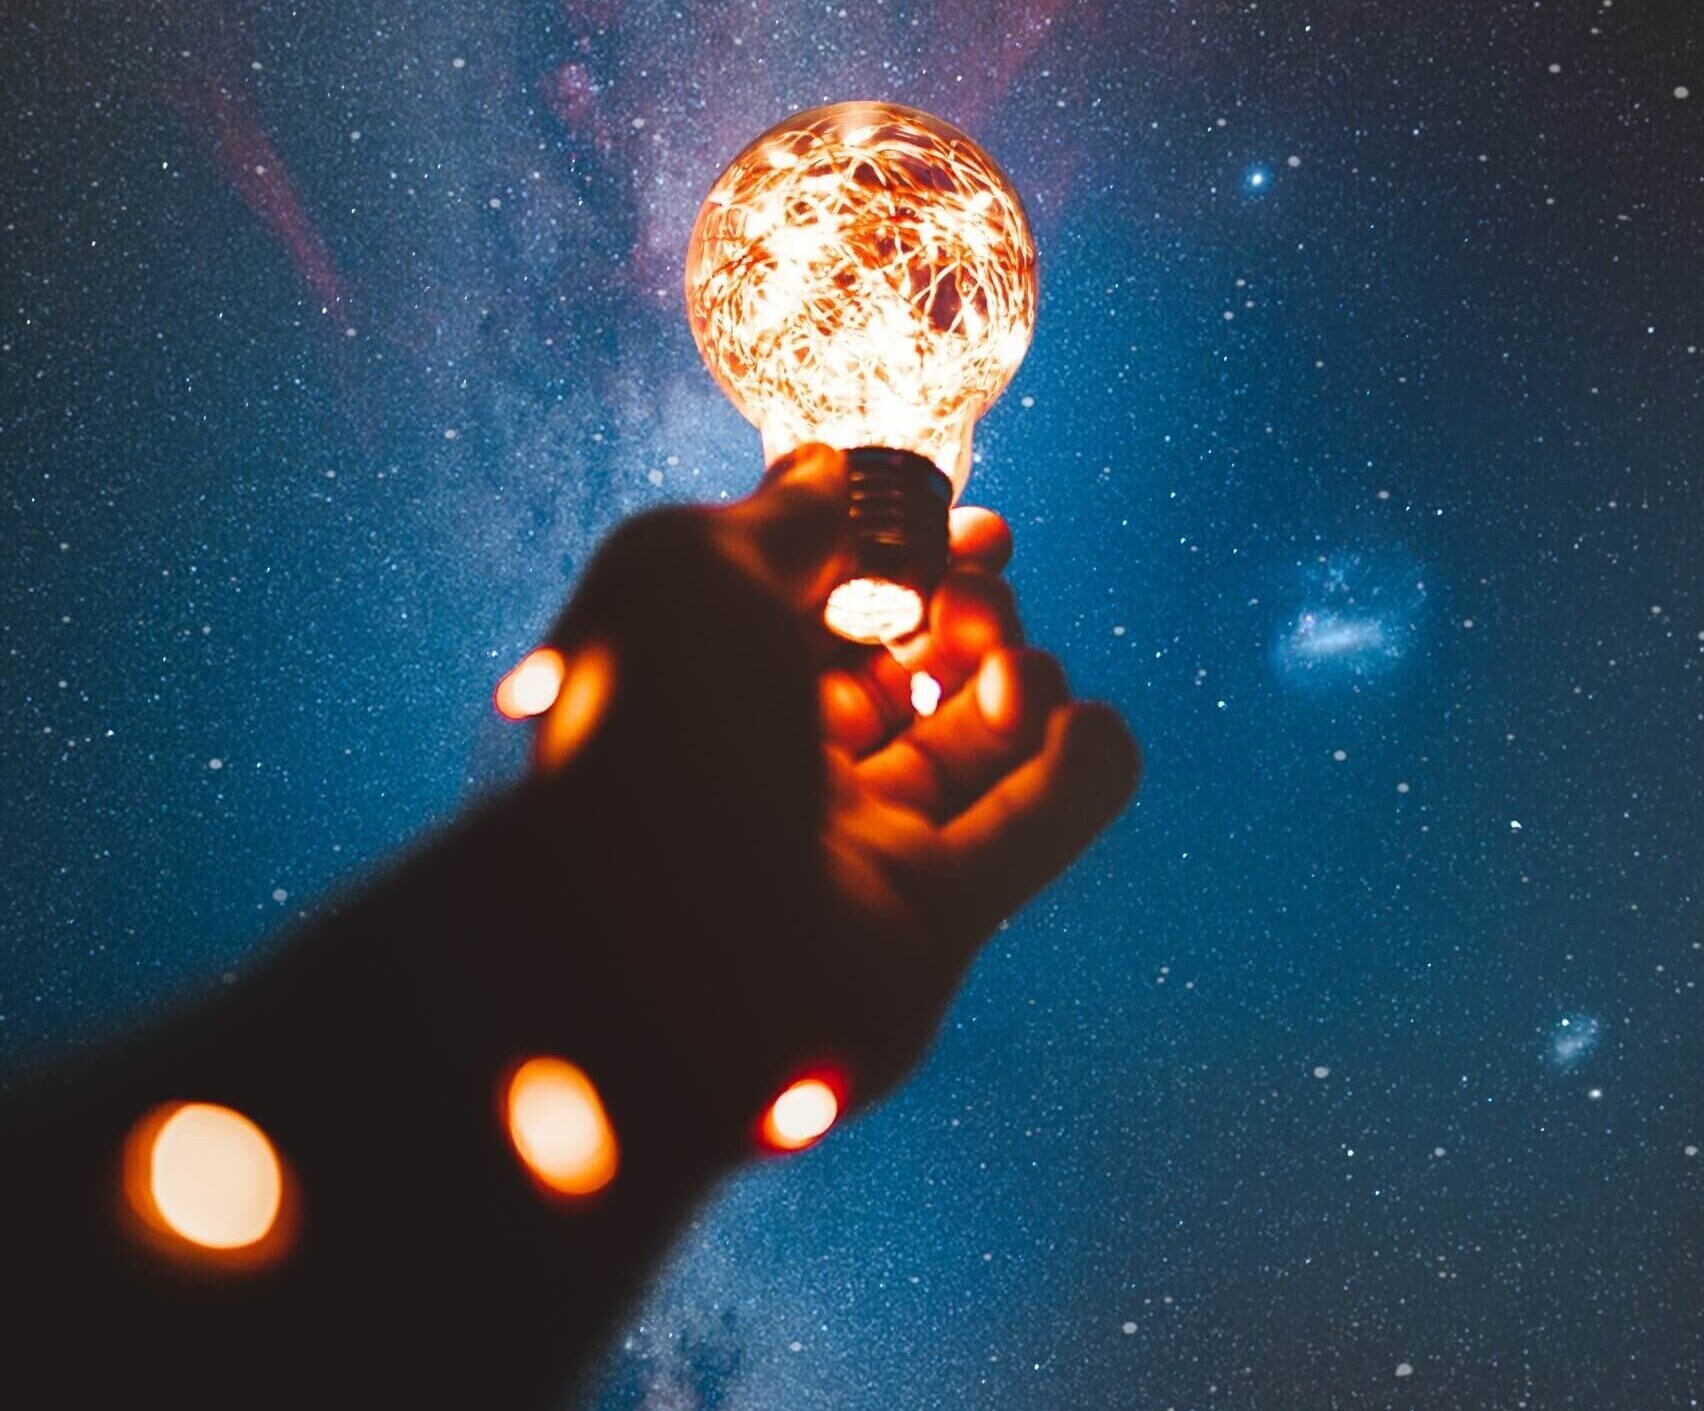 Image of a hand holding up a bright lightbulb against the night sky with stars